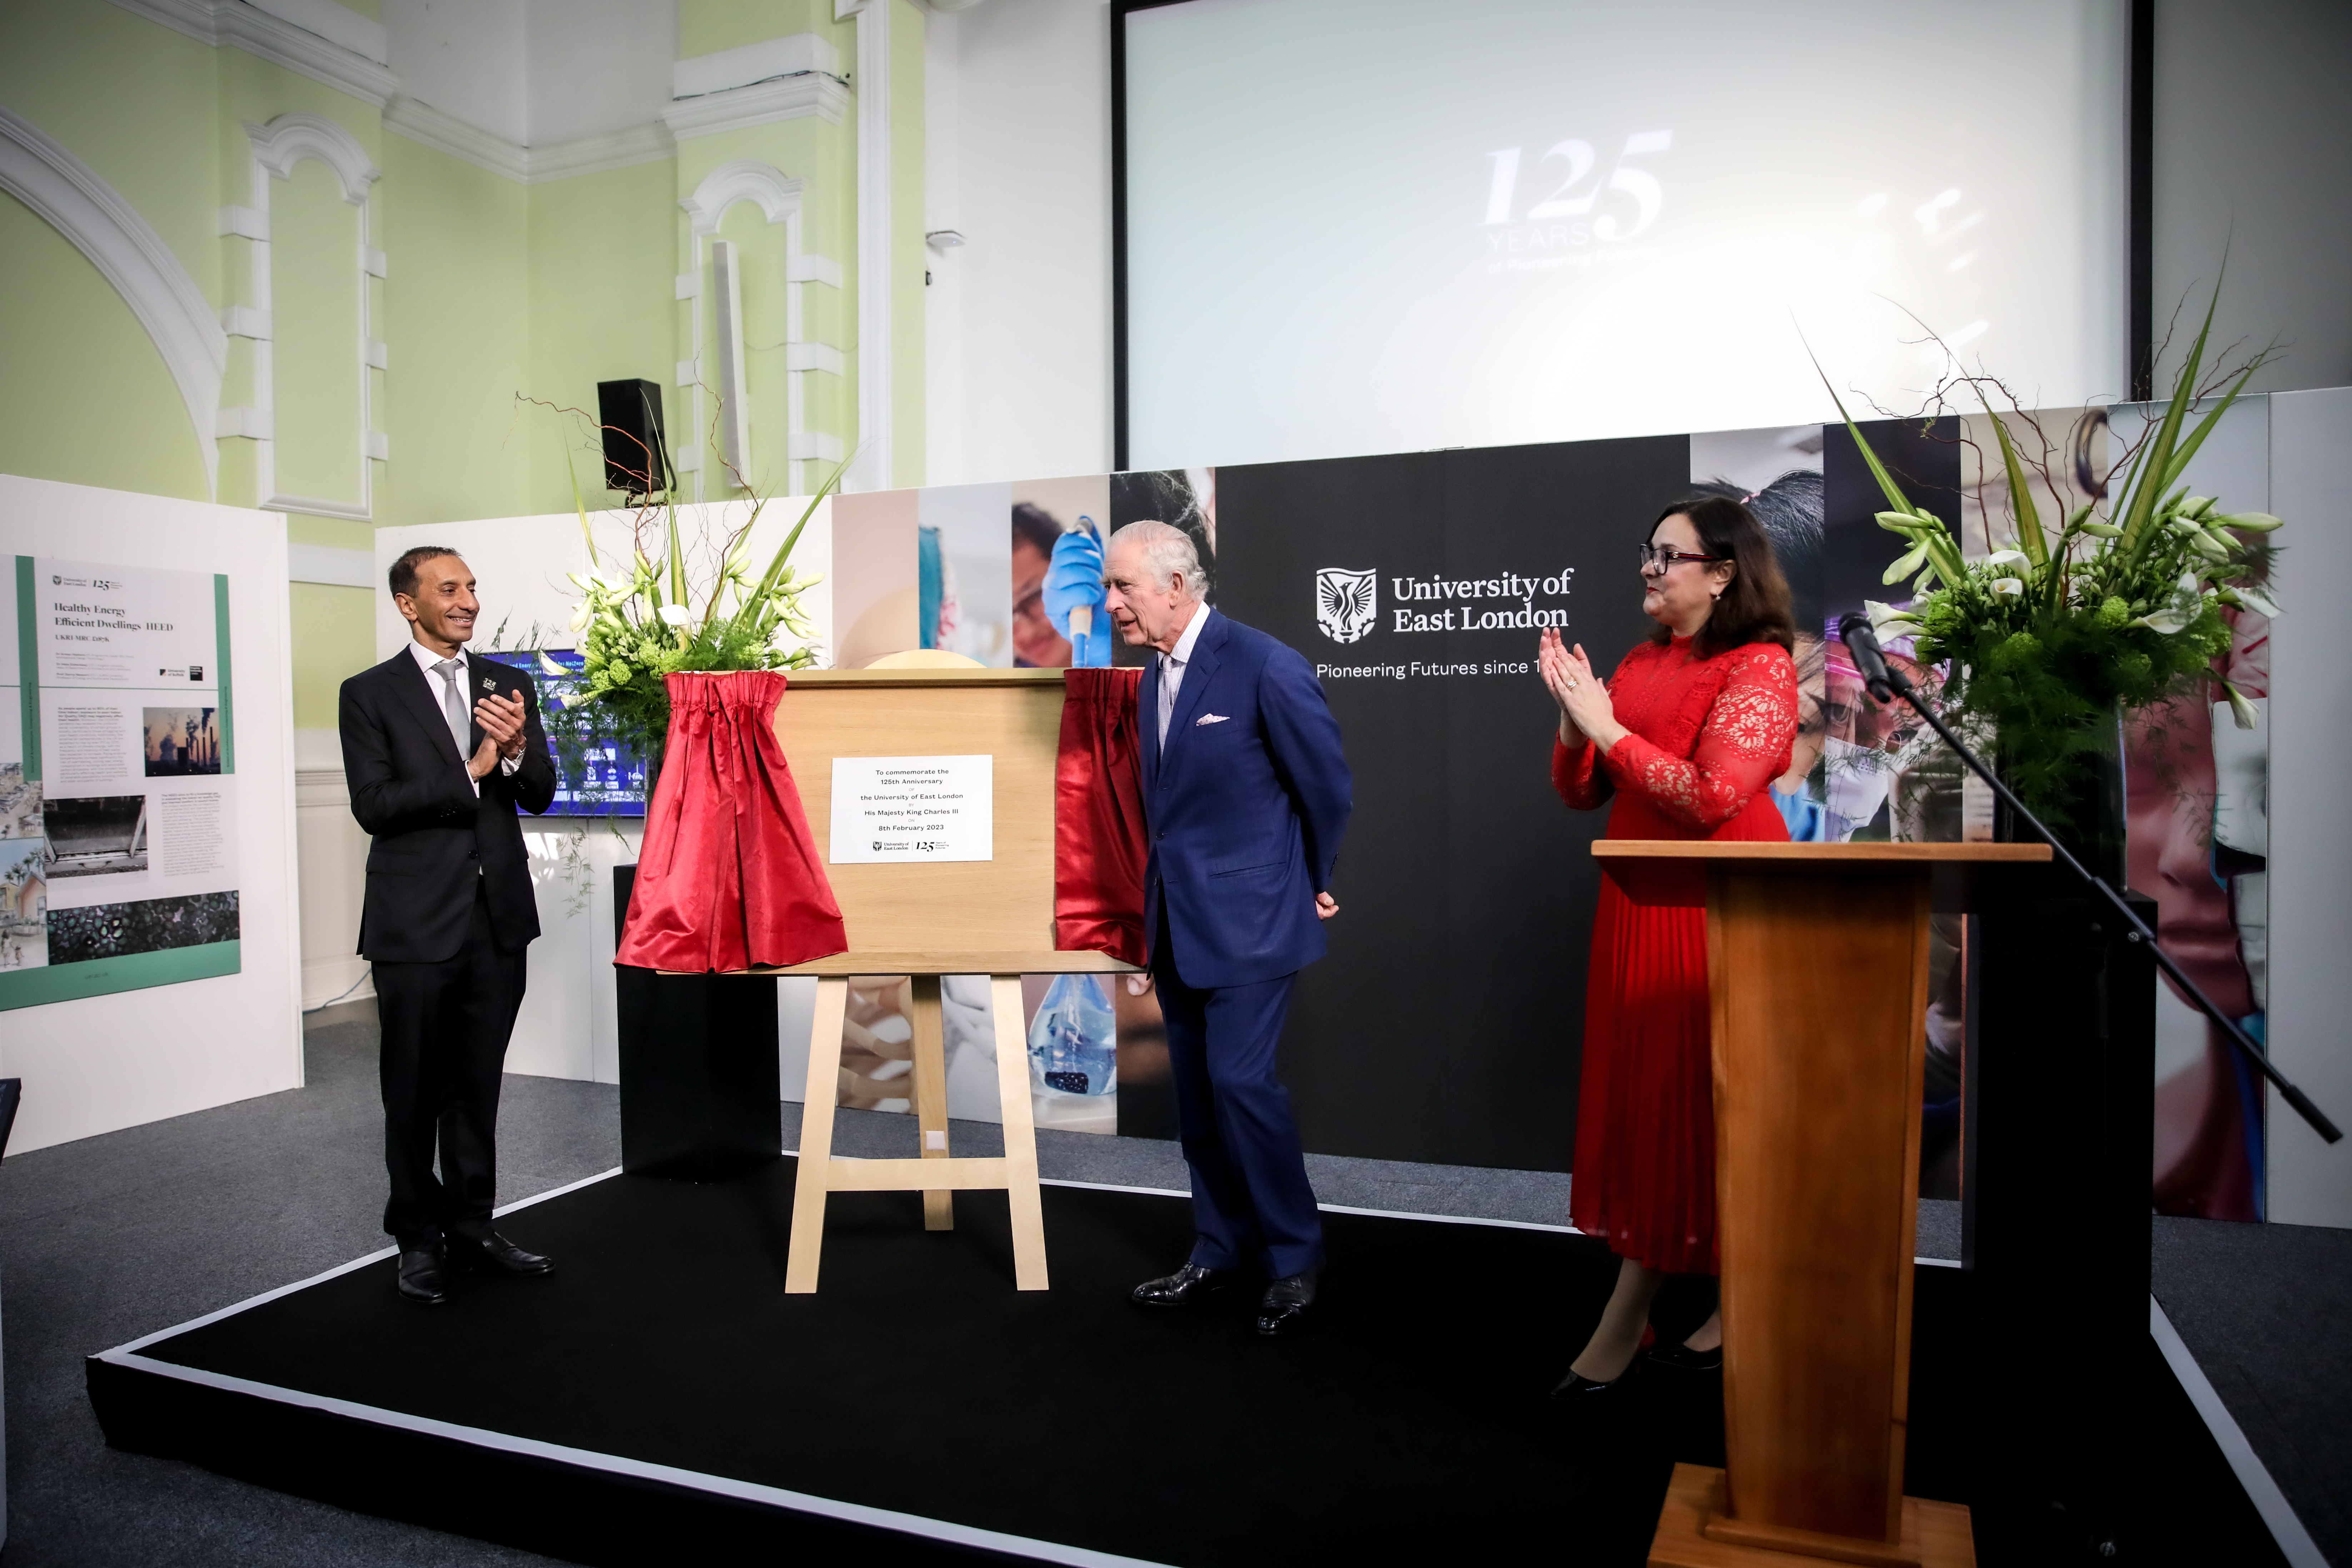 King Charles unveiling plaque to commemorate UEL's 125th anniversary.